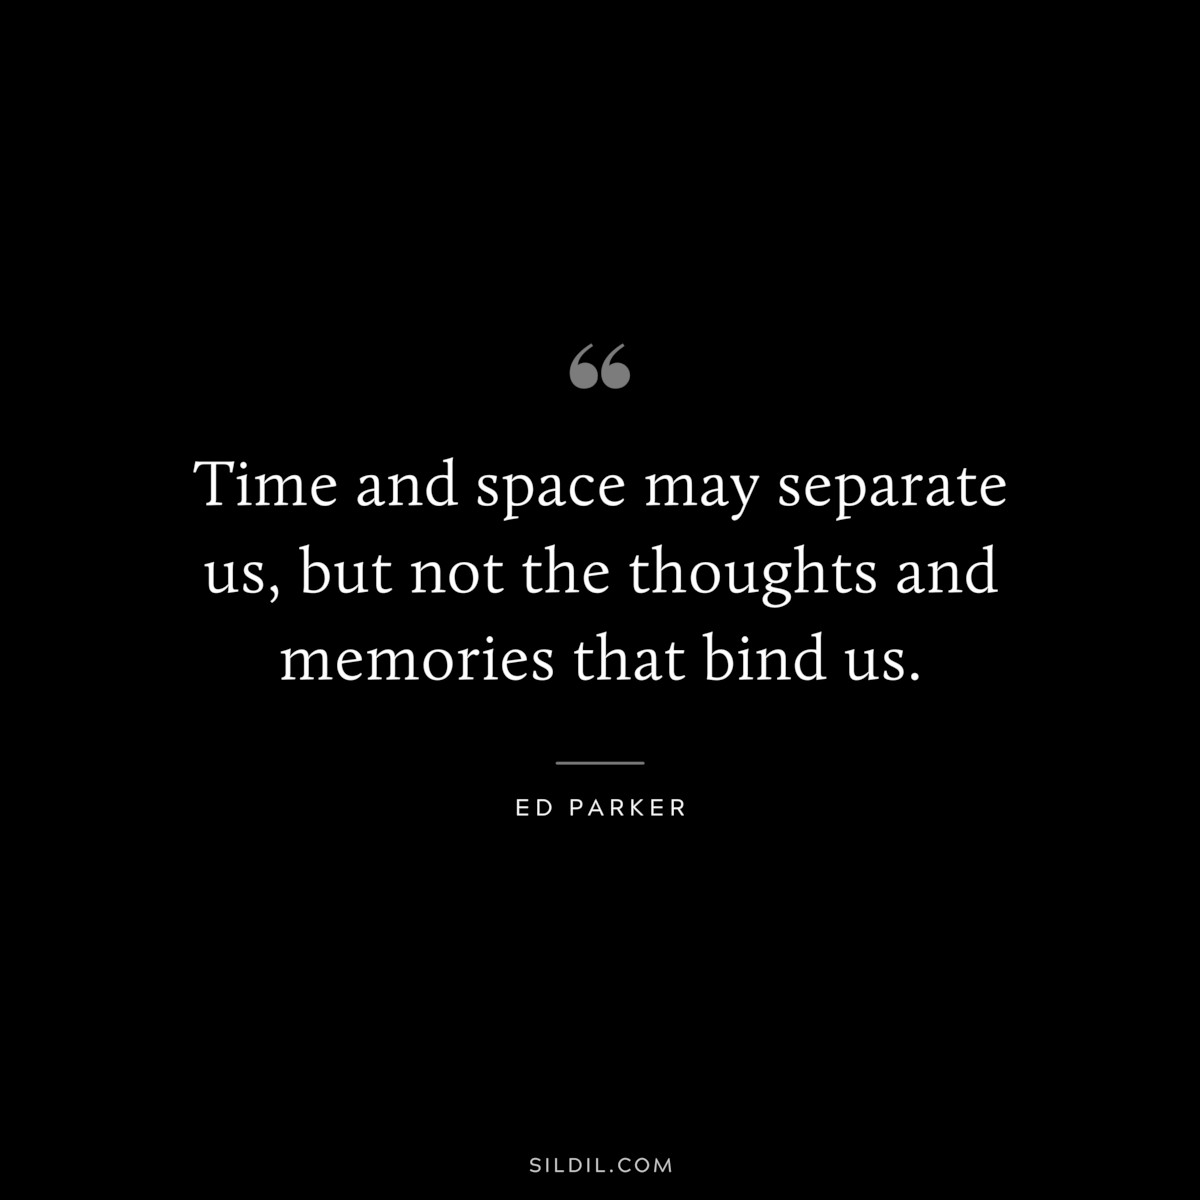 Time and space may separate us, but not the thoughts and memories that bind us. ― Ed Parker